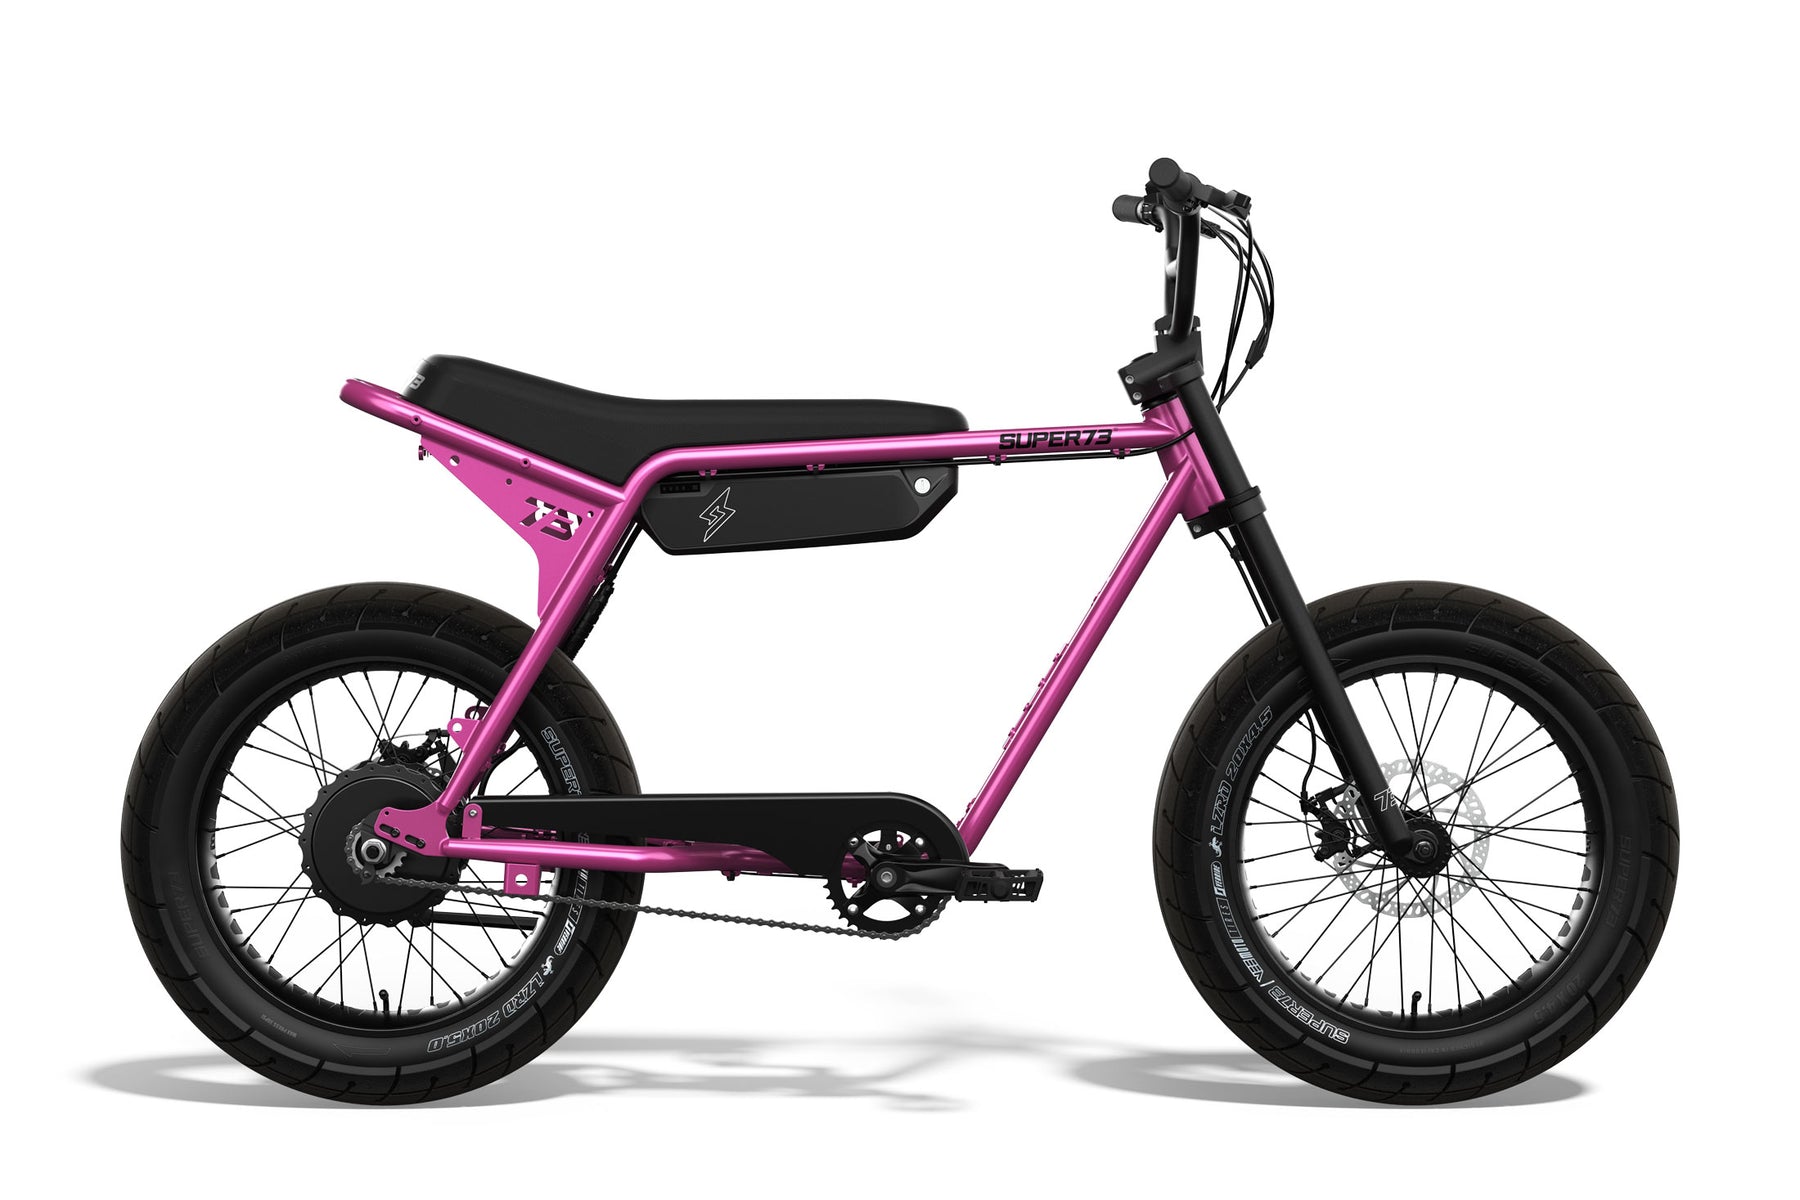 Side View of ZX: Prickly Pink, Super73 ebike